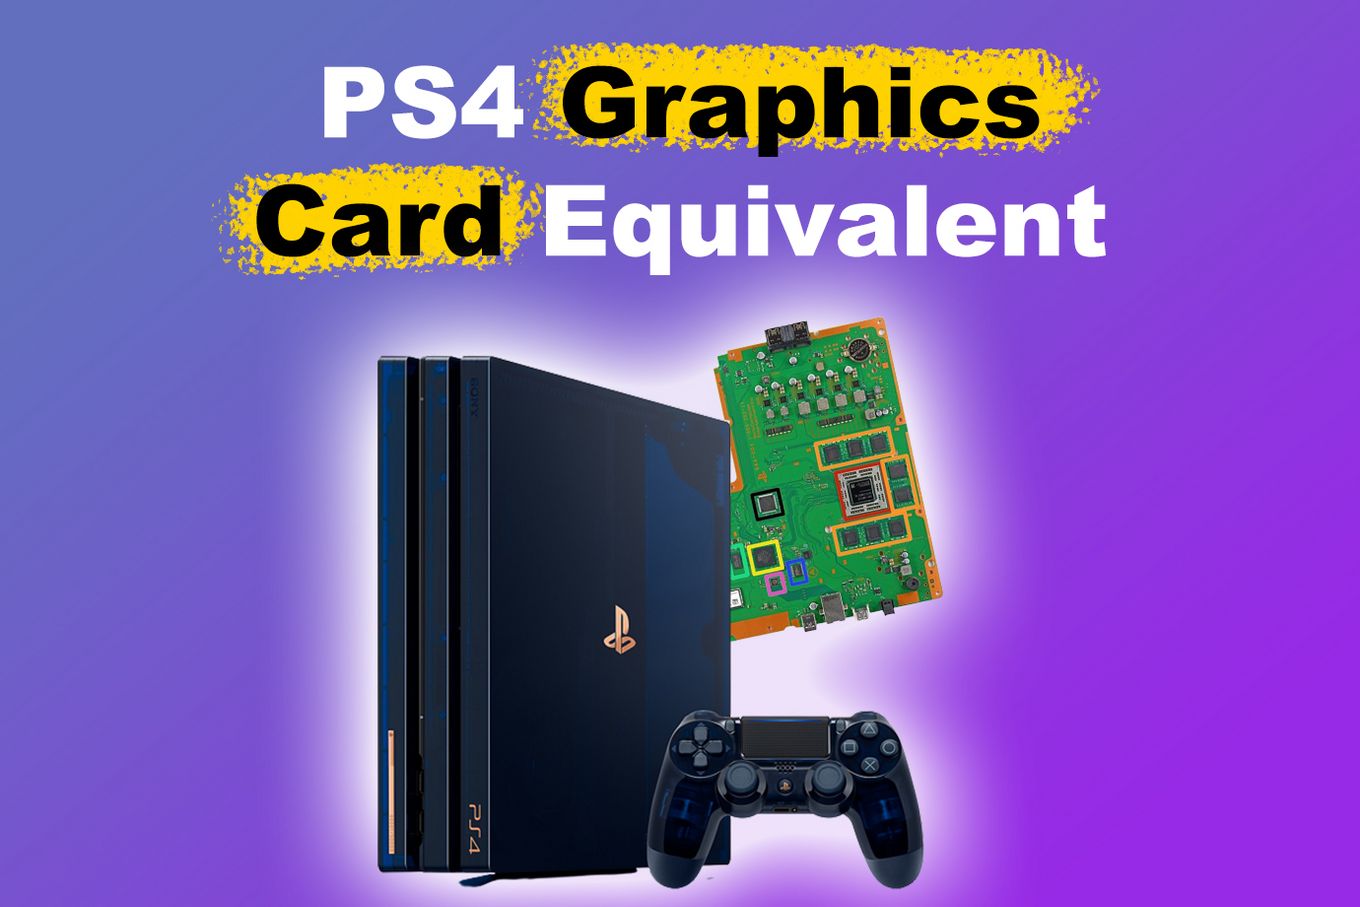 PS4 graphics card equivalent